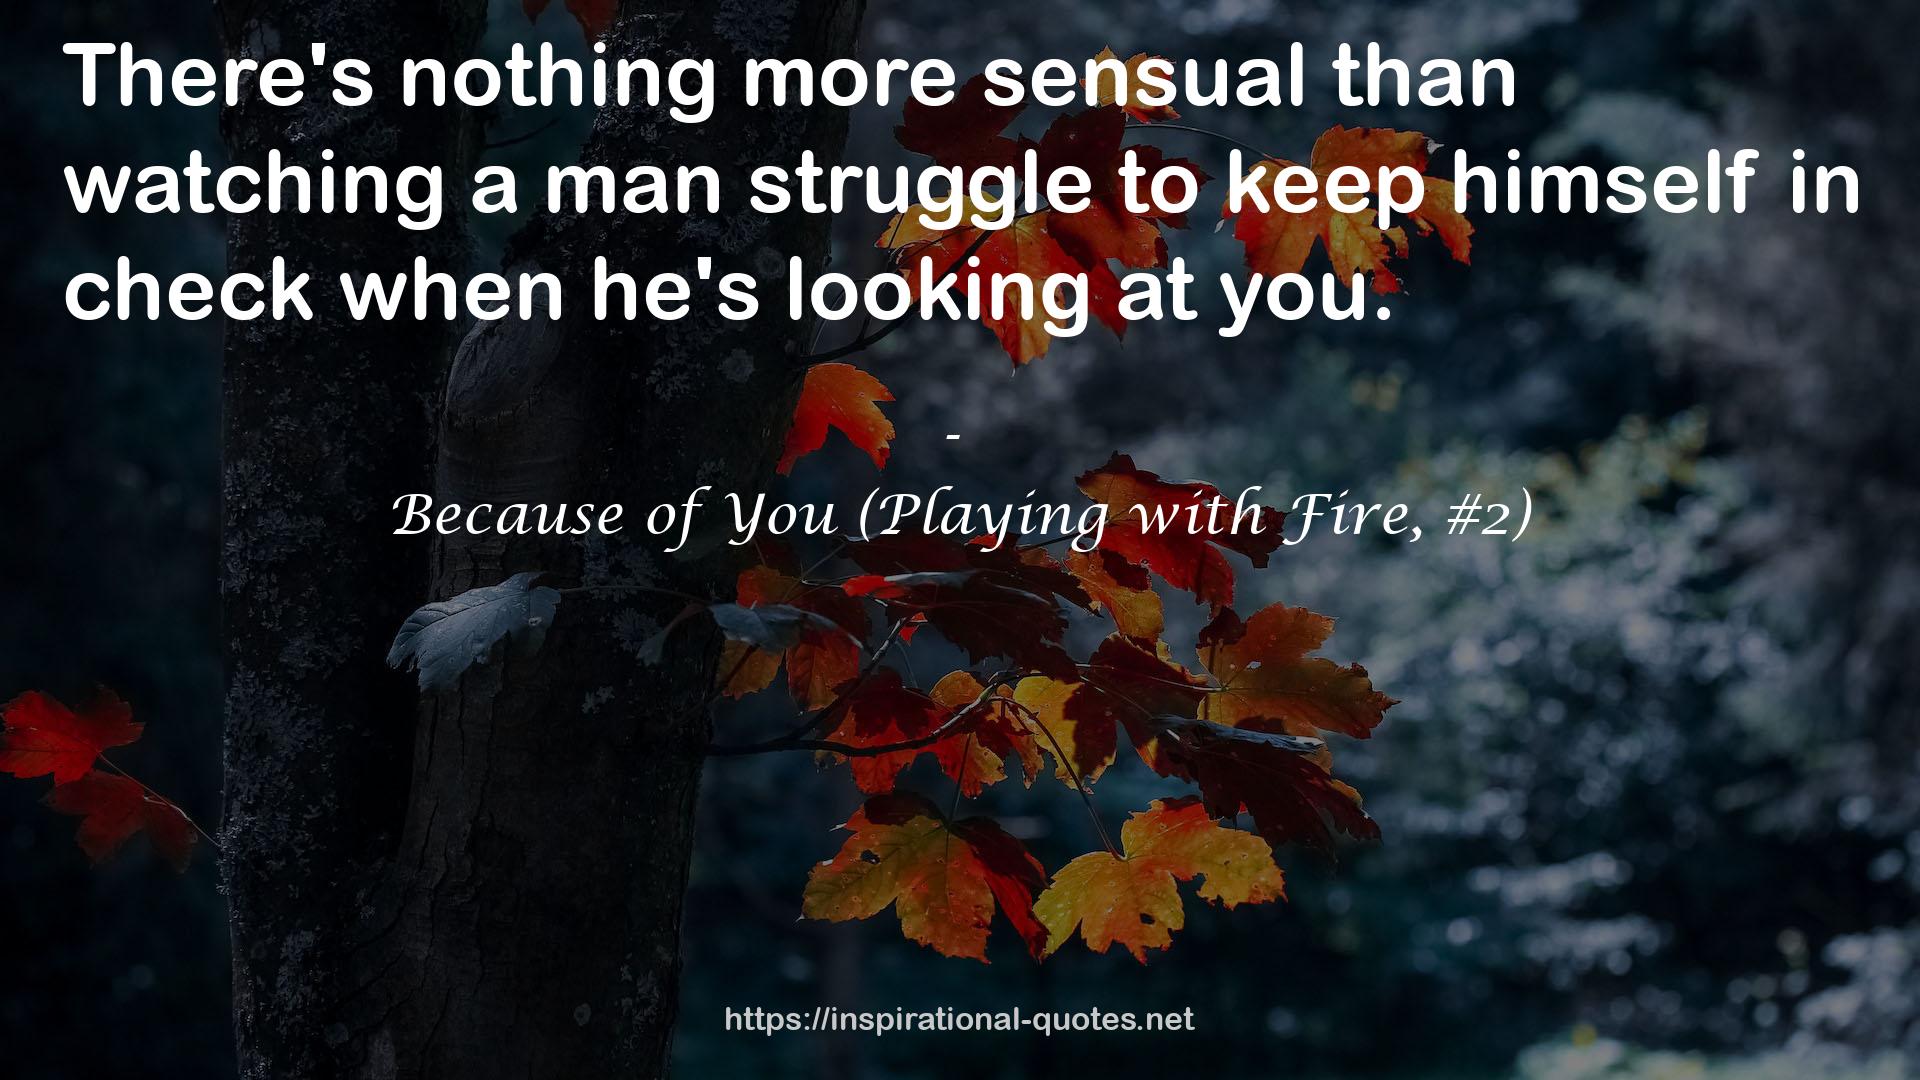 Because of You (Playing with Fire, #2) QUOTES